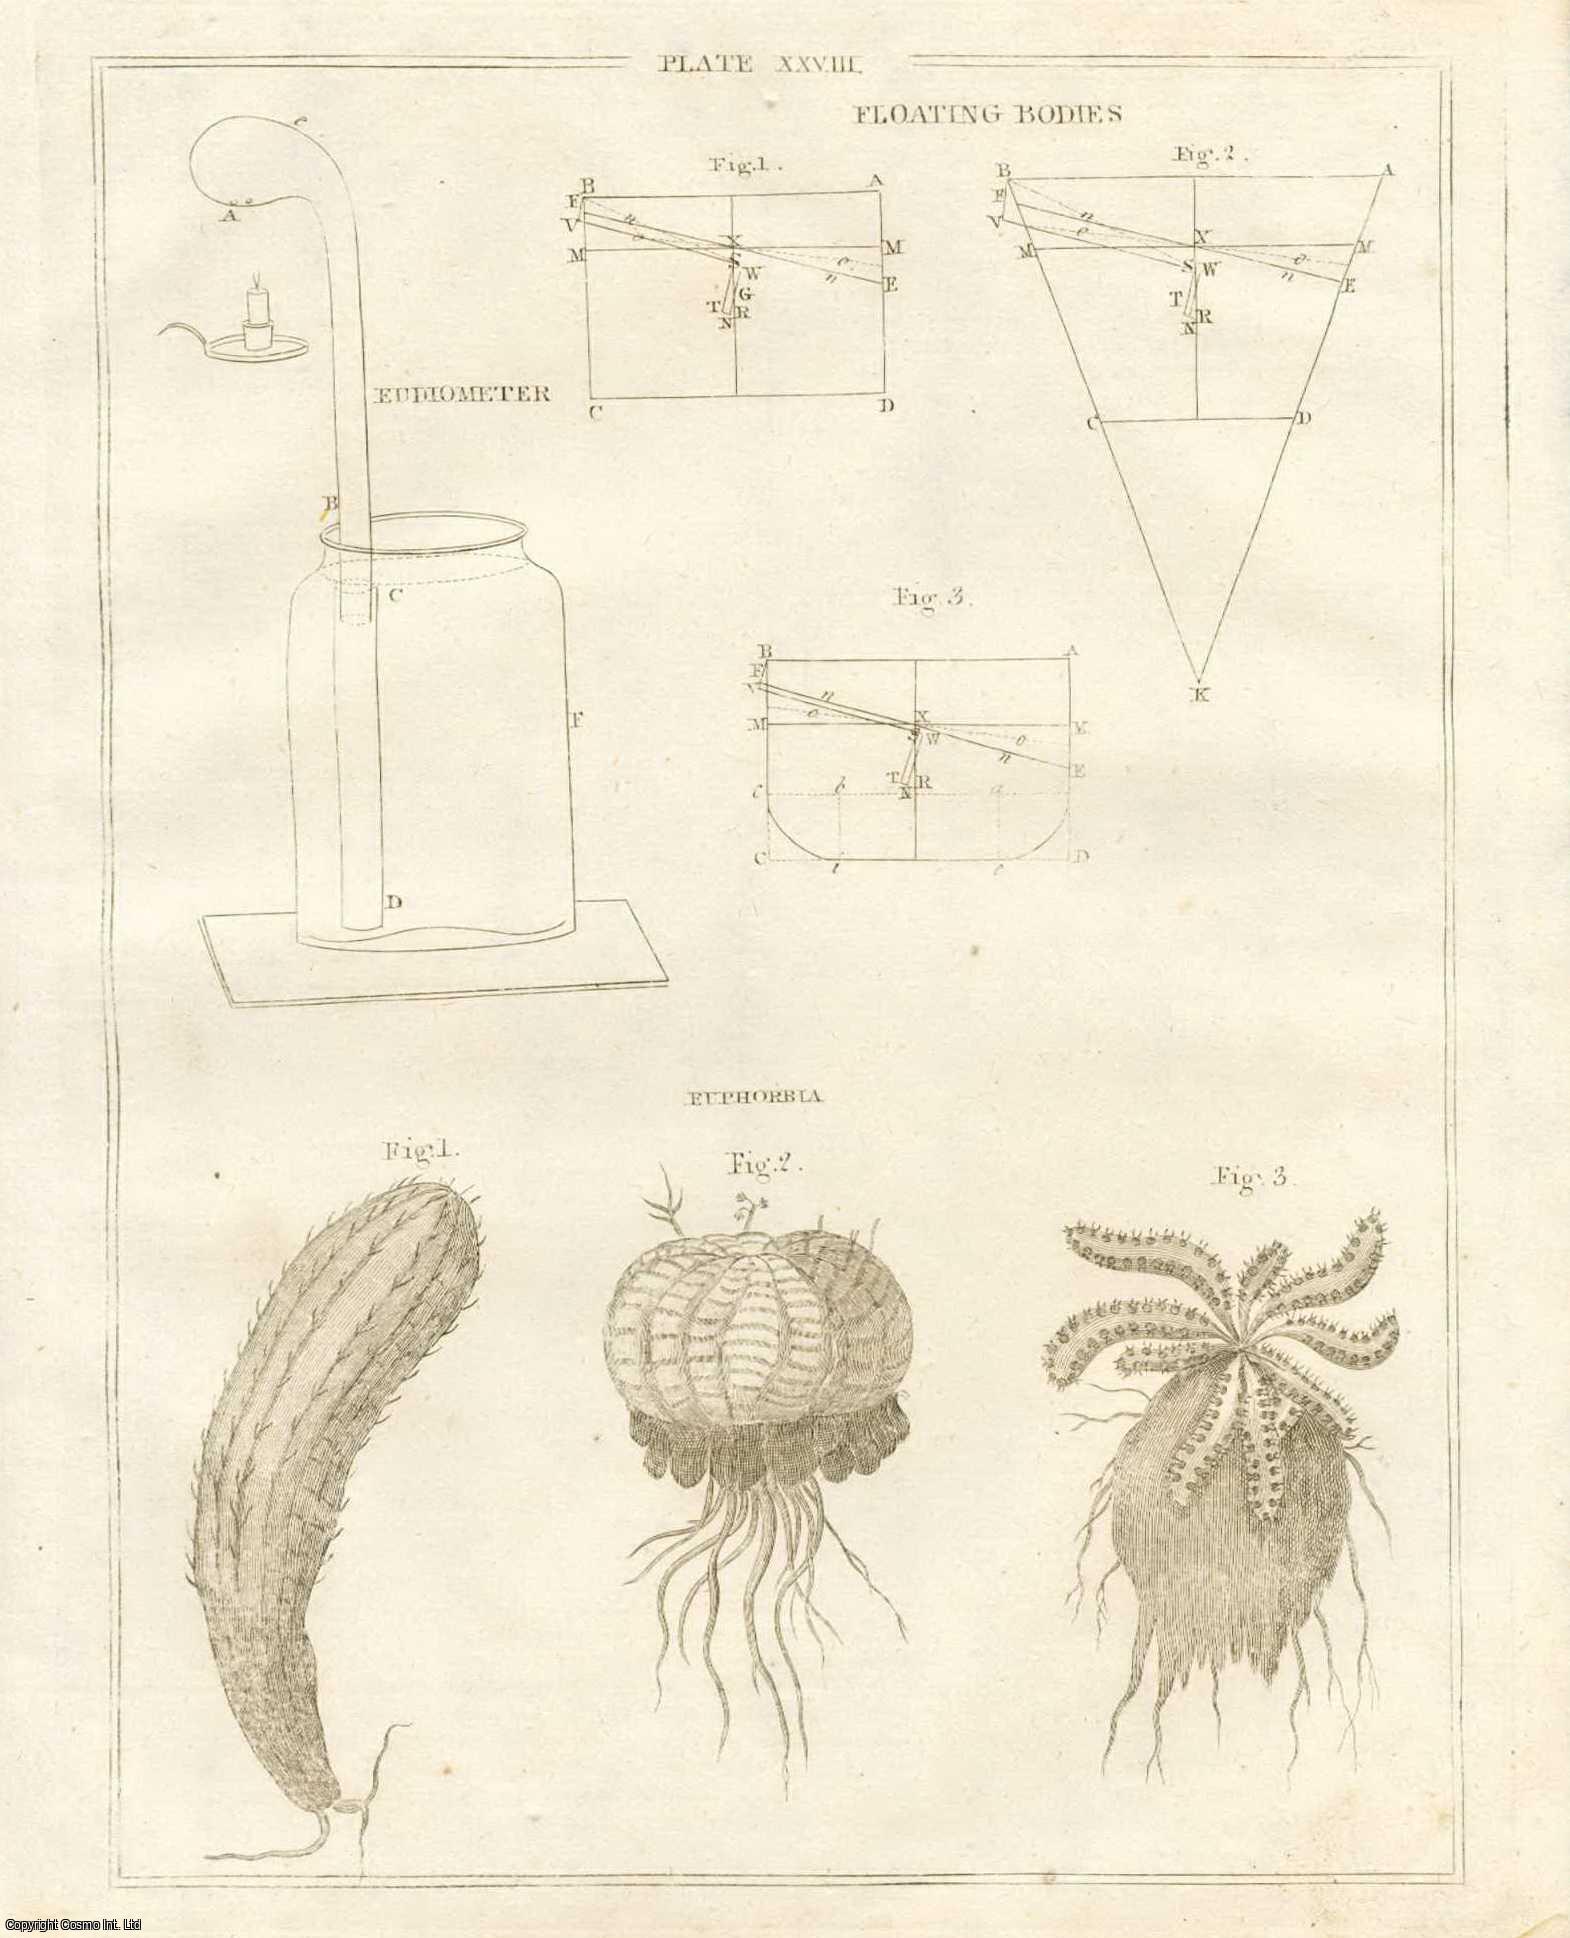 1801 - A plate of scientific interest from the Encyclopaedia Britannica, 1797.